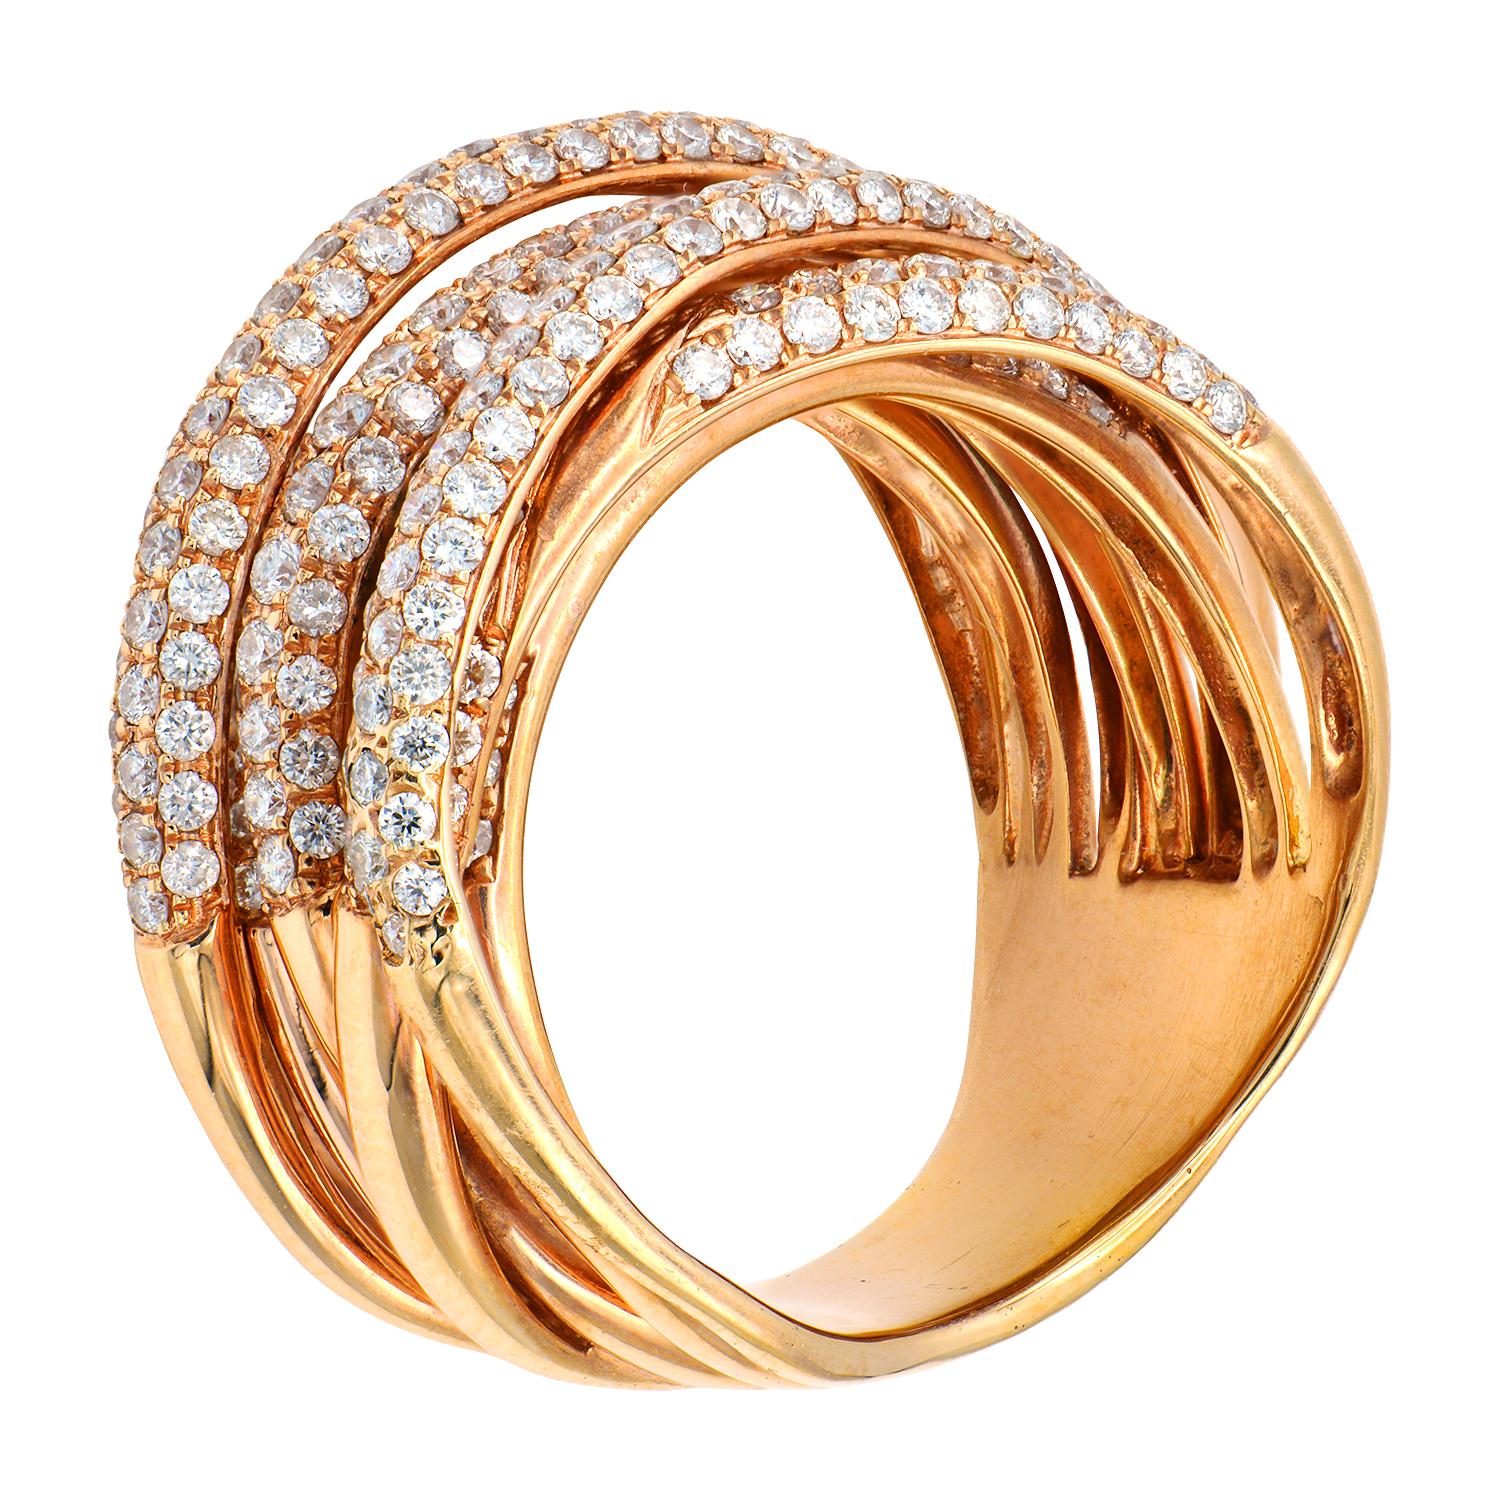 This ring is a stunning statement piece. Bands made of 11.5 grams of18 karat rose gold are over lapping each other, each adorned with shimmering VS2, G color diamonds. There are 322 round diamonds totaling 2.37 carats. This ring is size 6.5.